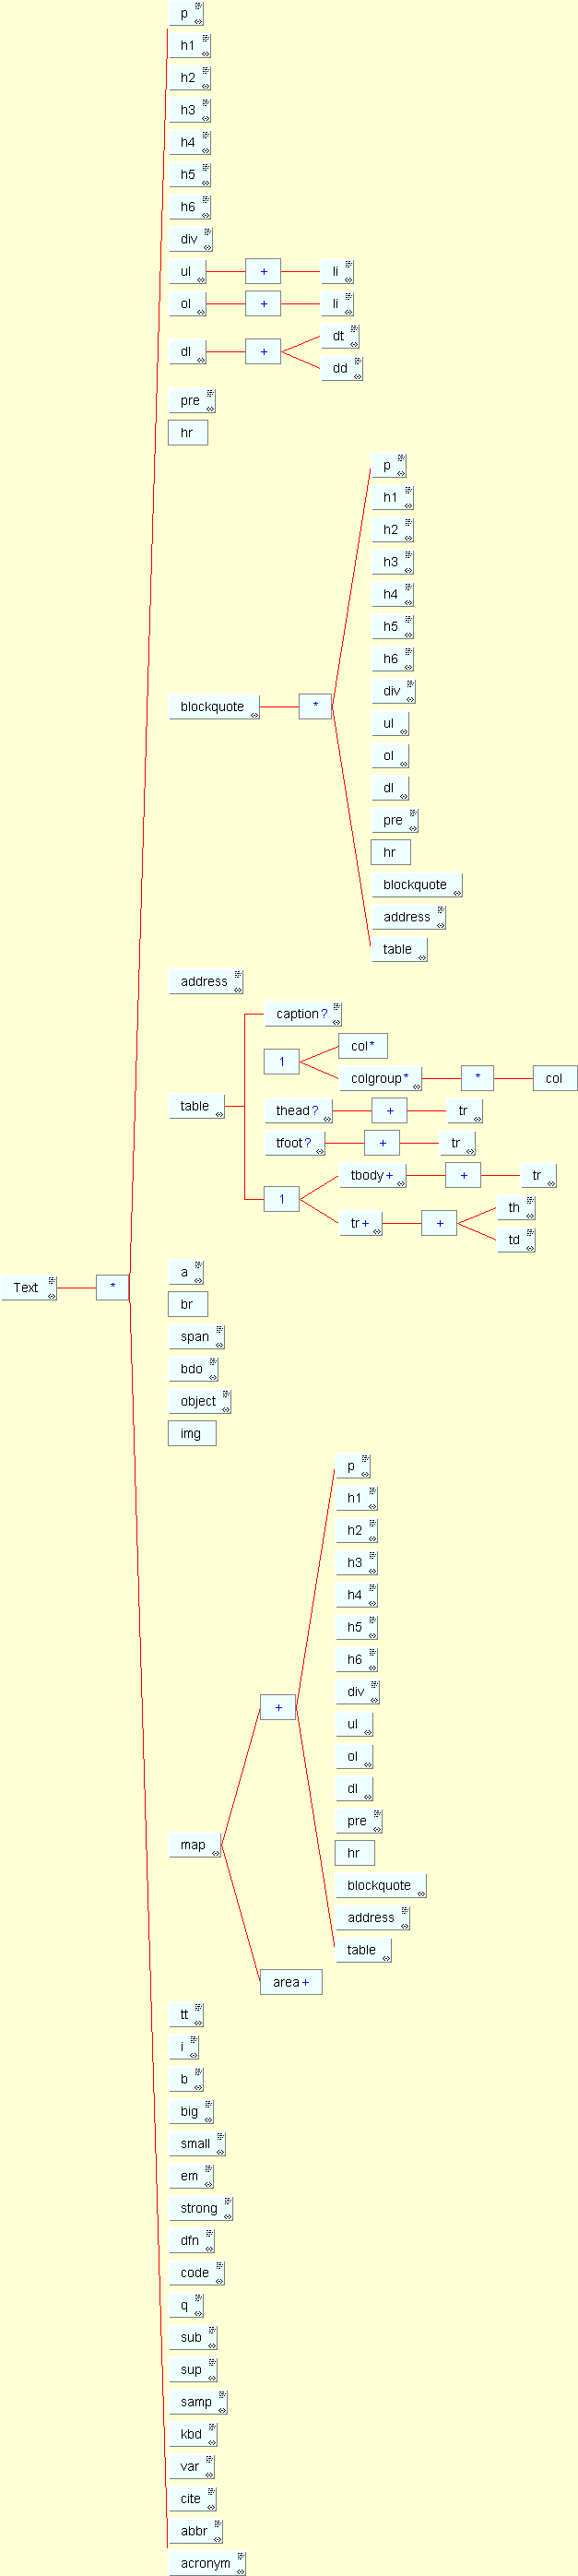 XHTML structure diagram